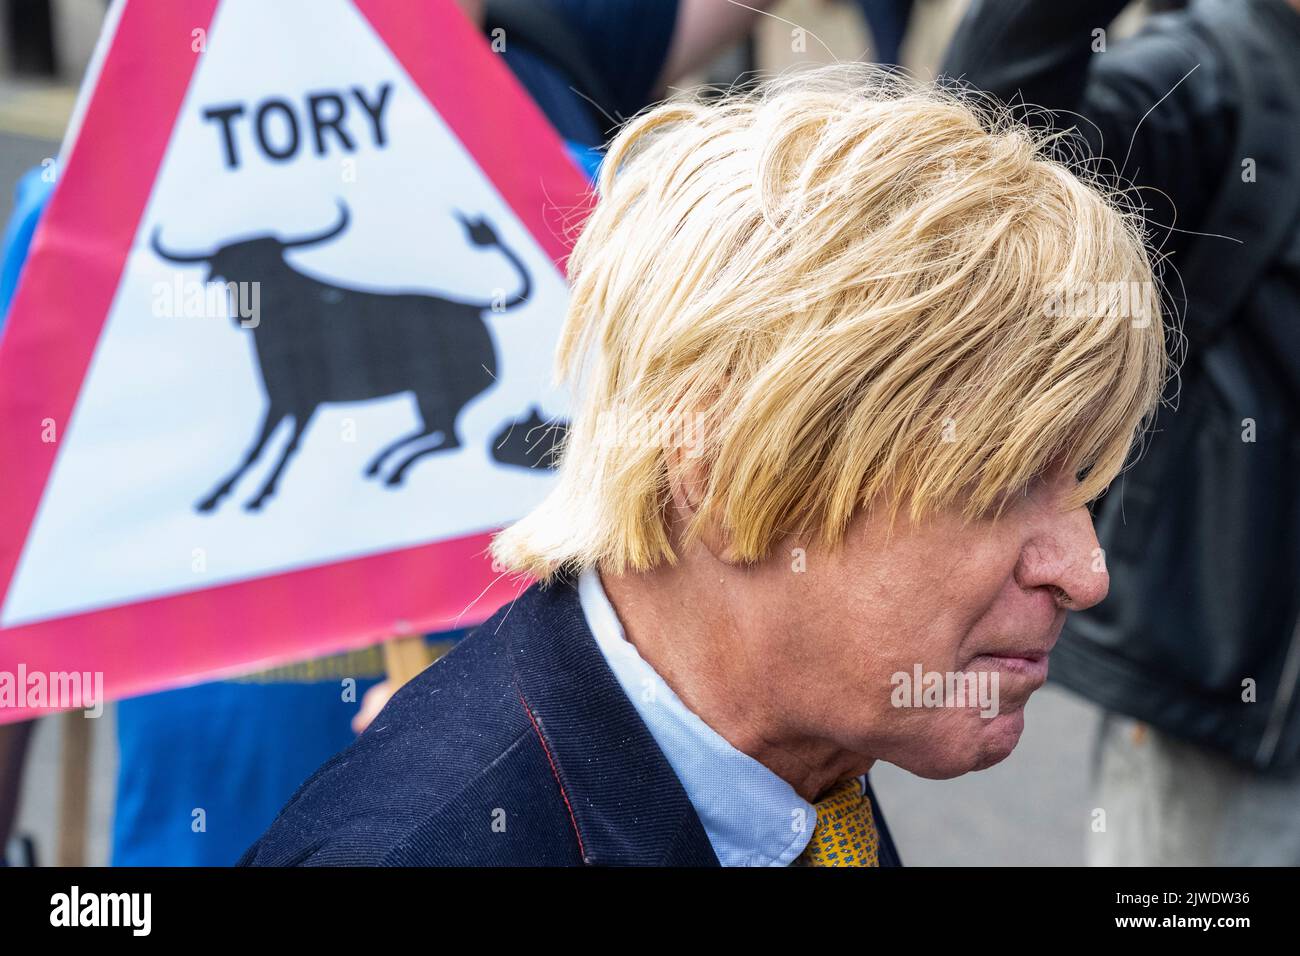 London, UK.  5 September 2022. Michael Fabricant arrives at the Queen Elizabeth II centre in Westminster ahead of Liz Truss being announced as the new leader of the Conservative Party and Prime Minister after Boris Johnson resigned. Credit: Stephen Chung / Alamy Live News Stock Photo